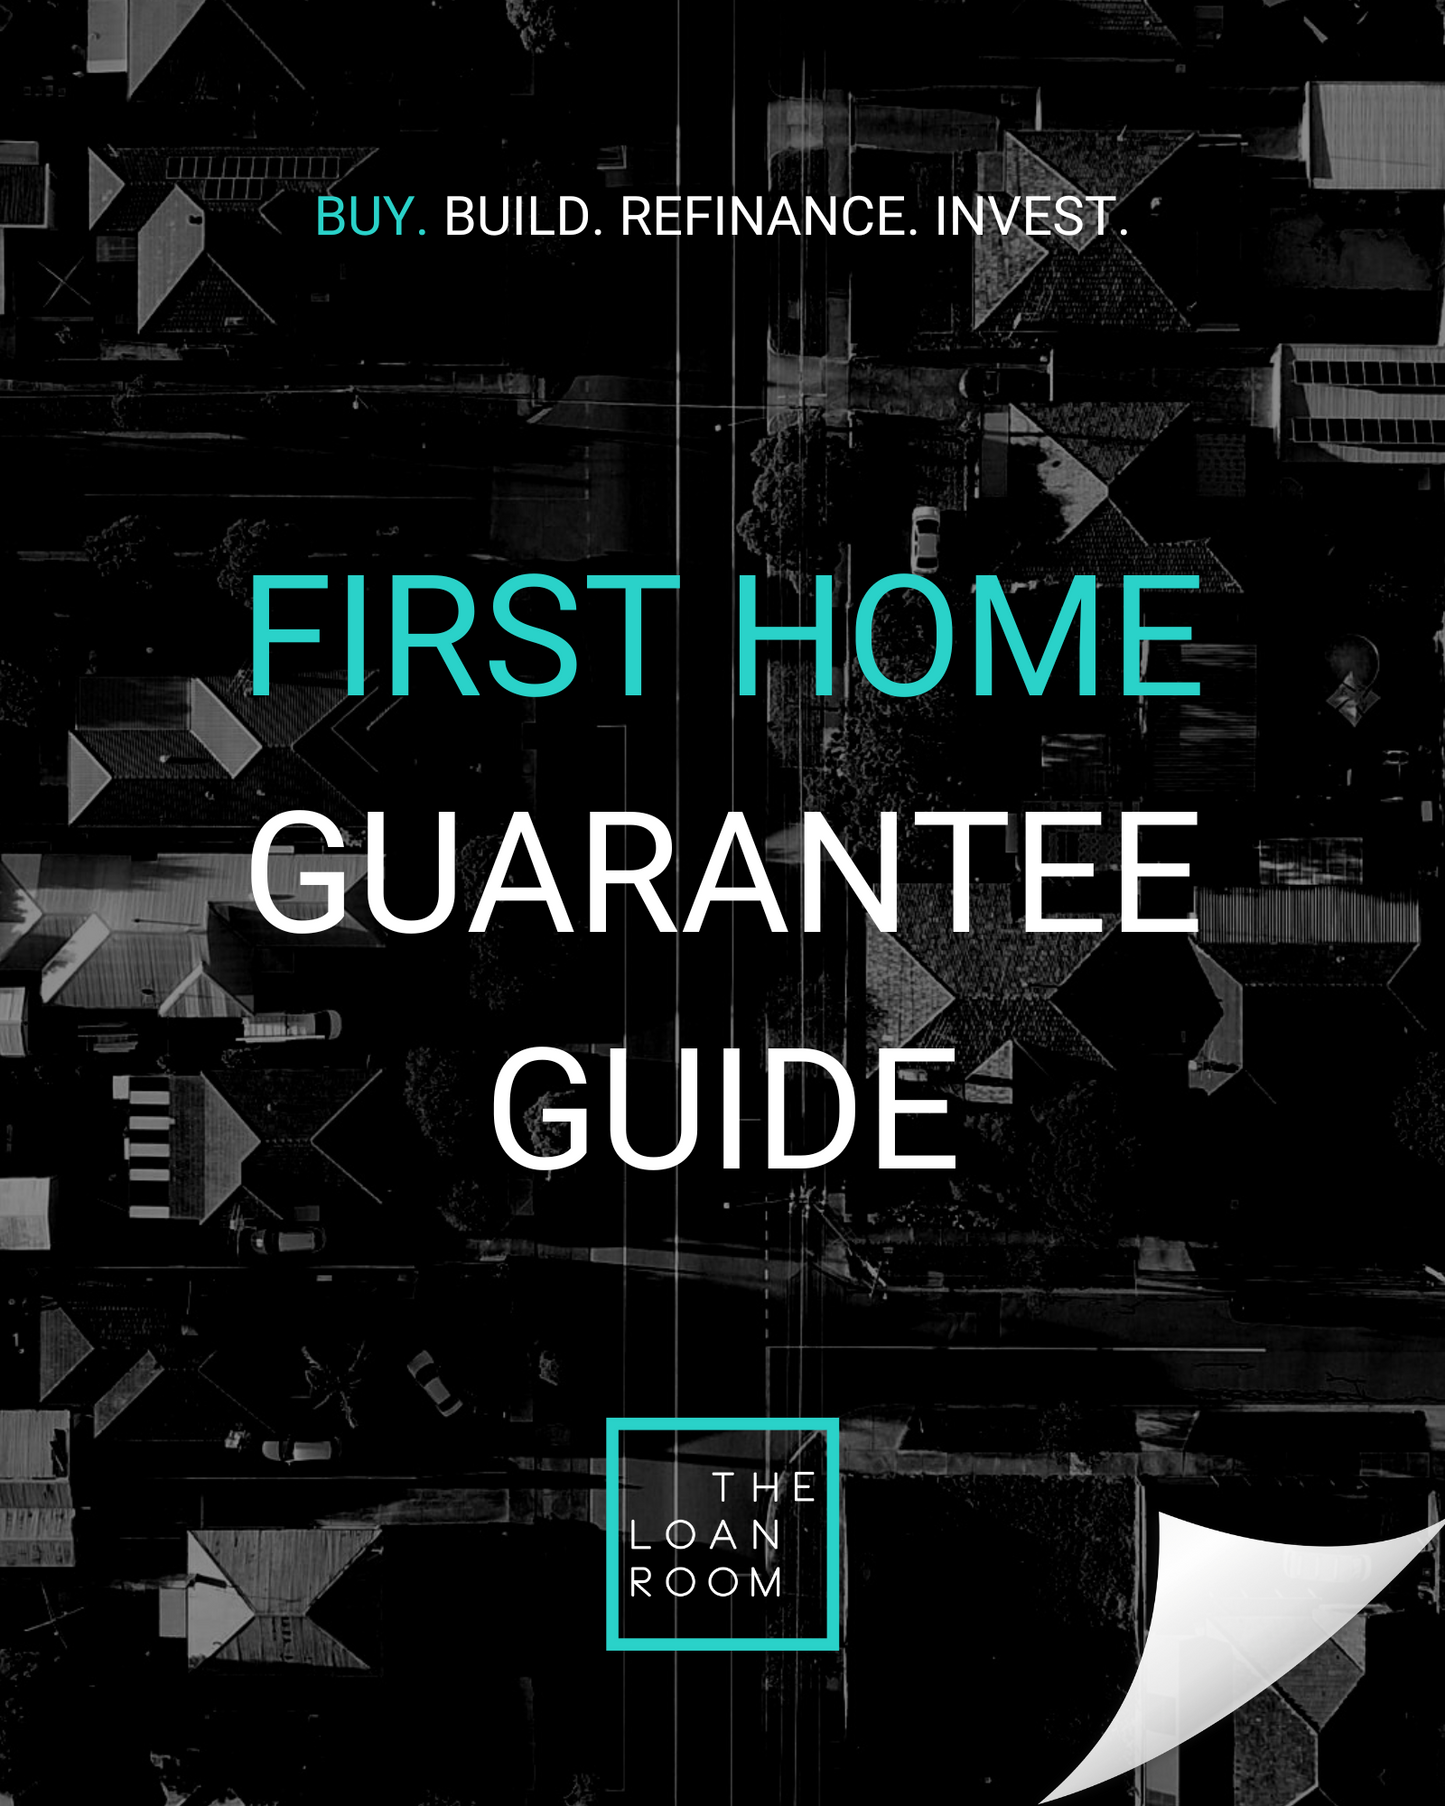 FIRST HOME GUARANTEE GUIDE